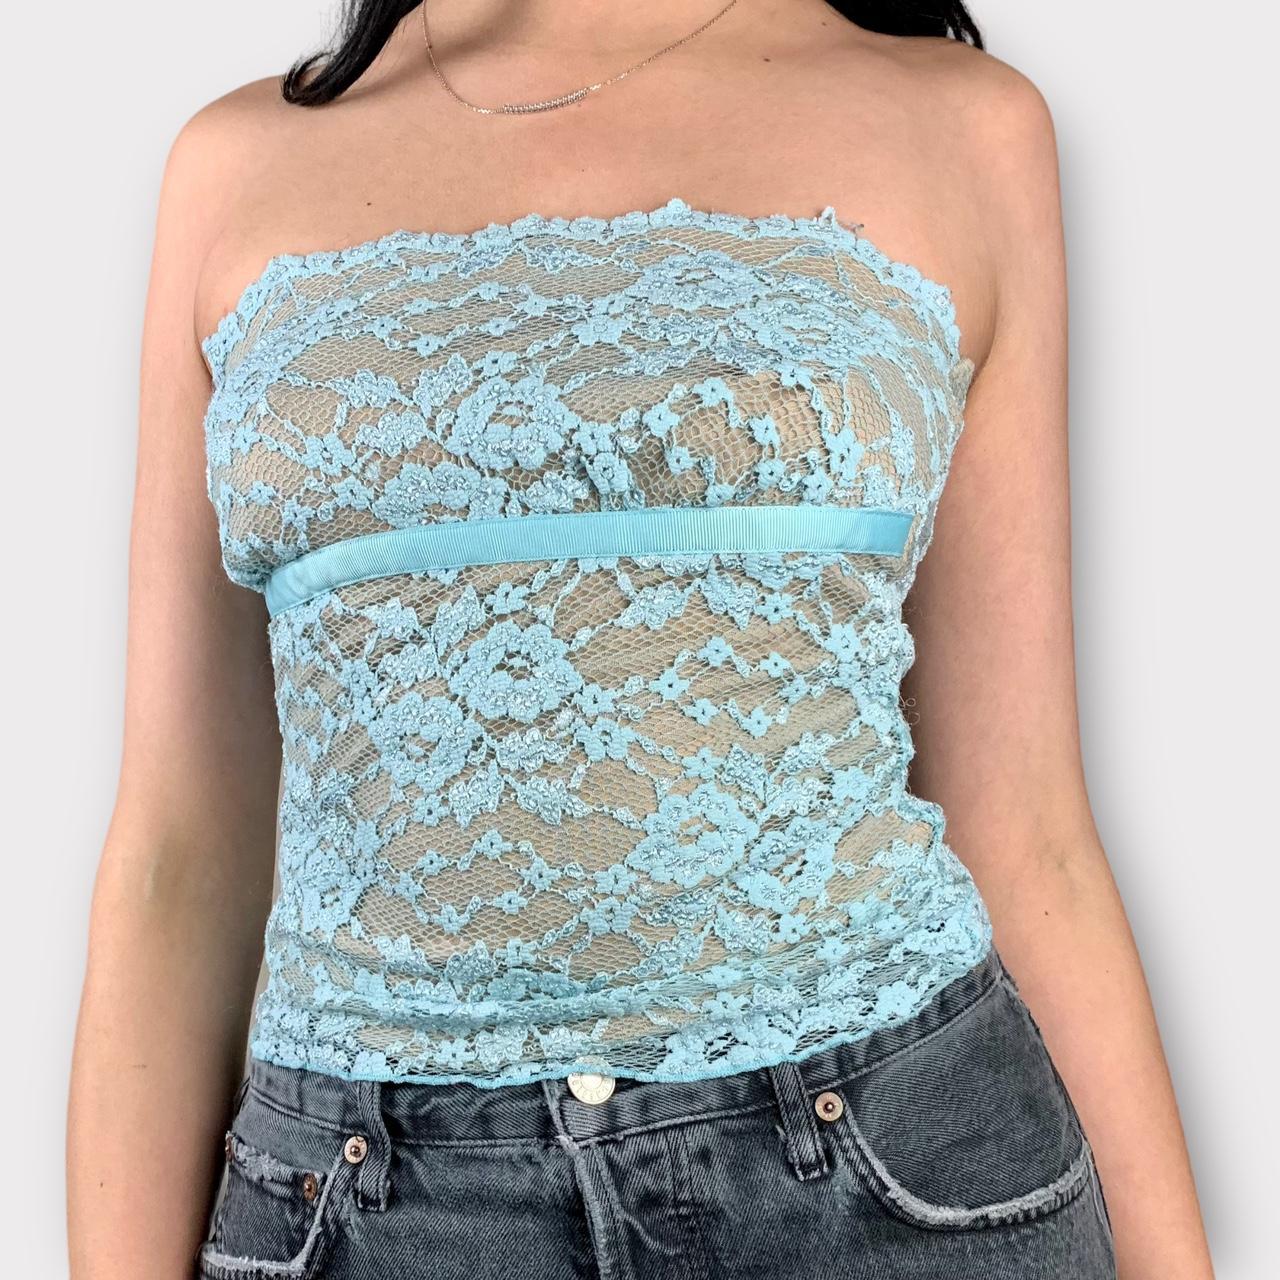 Women's Lace Bandeau Tube Crop Top Stretch Lined